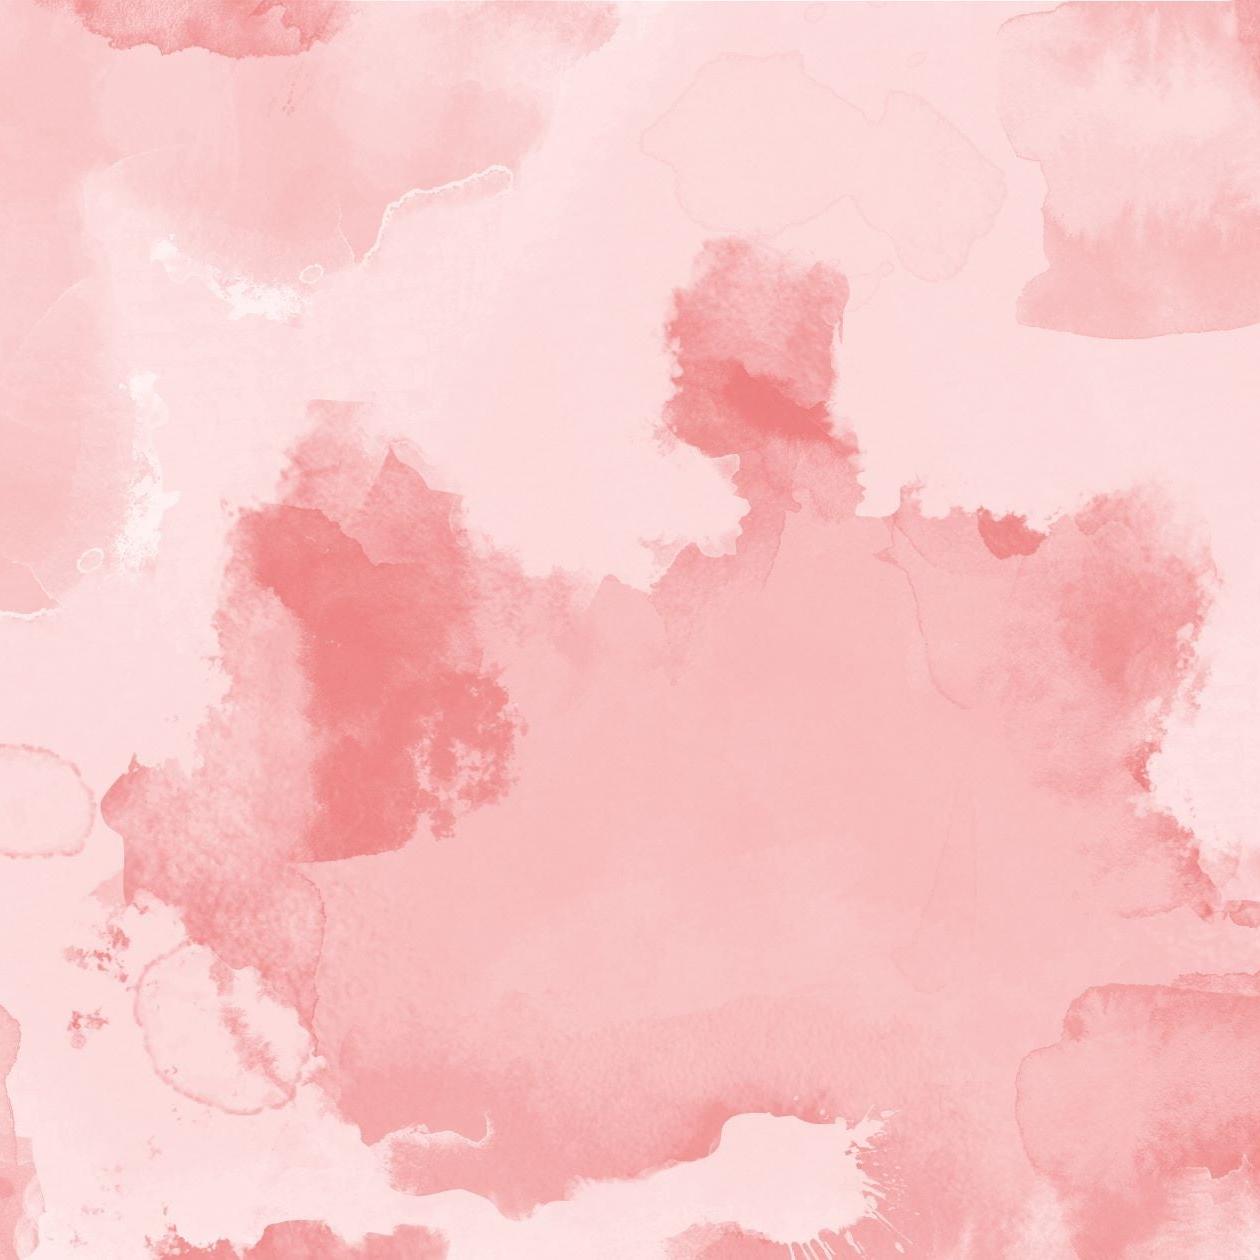 Buy Blush PINK WALLPAPER RAIN Drop Abstract Wallpaper Online in India  Etsy